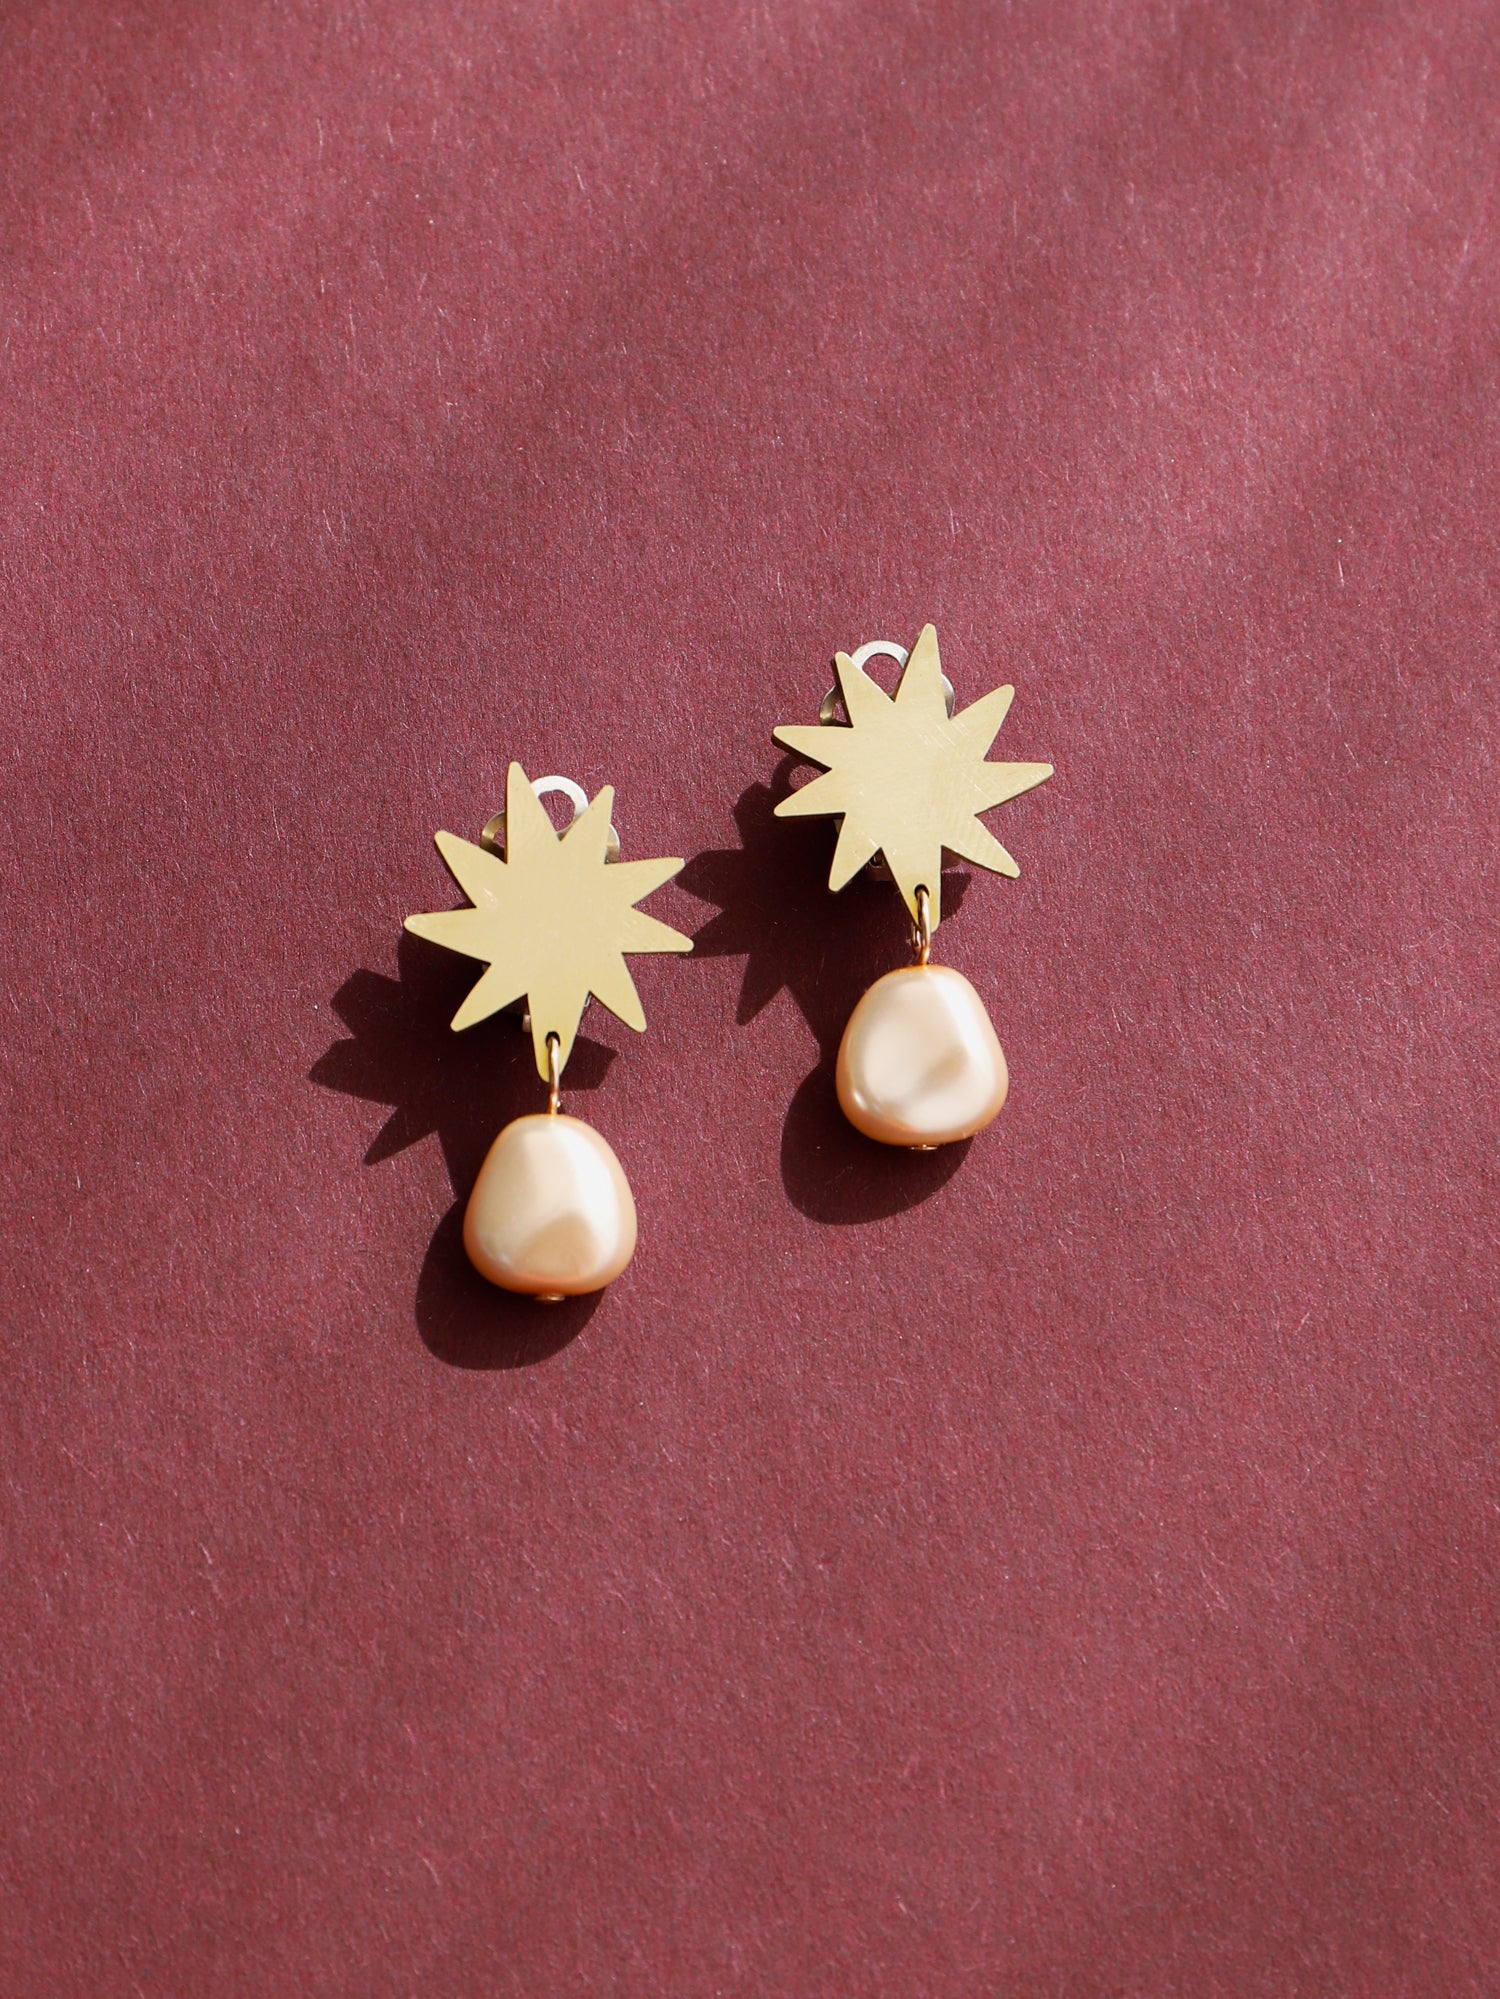 Elegant drop clip-on studs, inspired by Matisse's cutout-style stars. Made in brass with our signature wood base, Czech glass baroque pearls and sterling silver earring clip-on clasps. Handmade in the UK by Wolf & Moon.